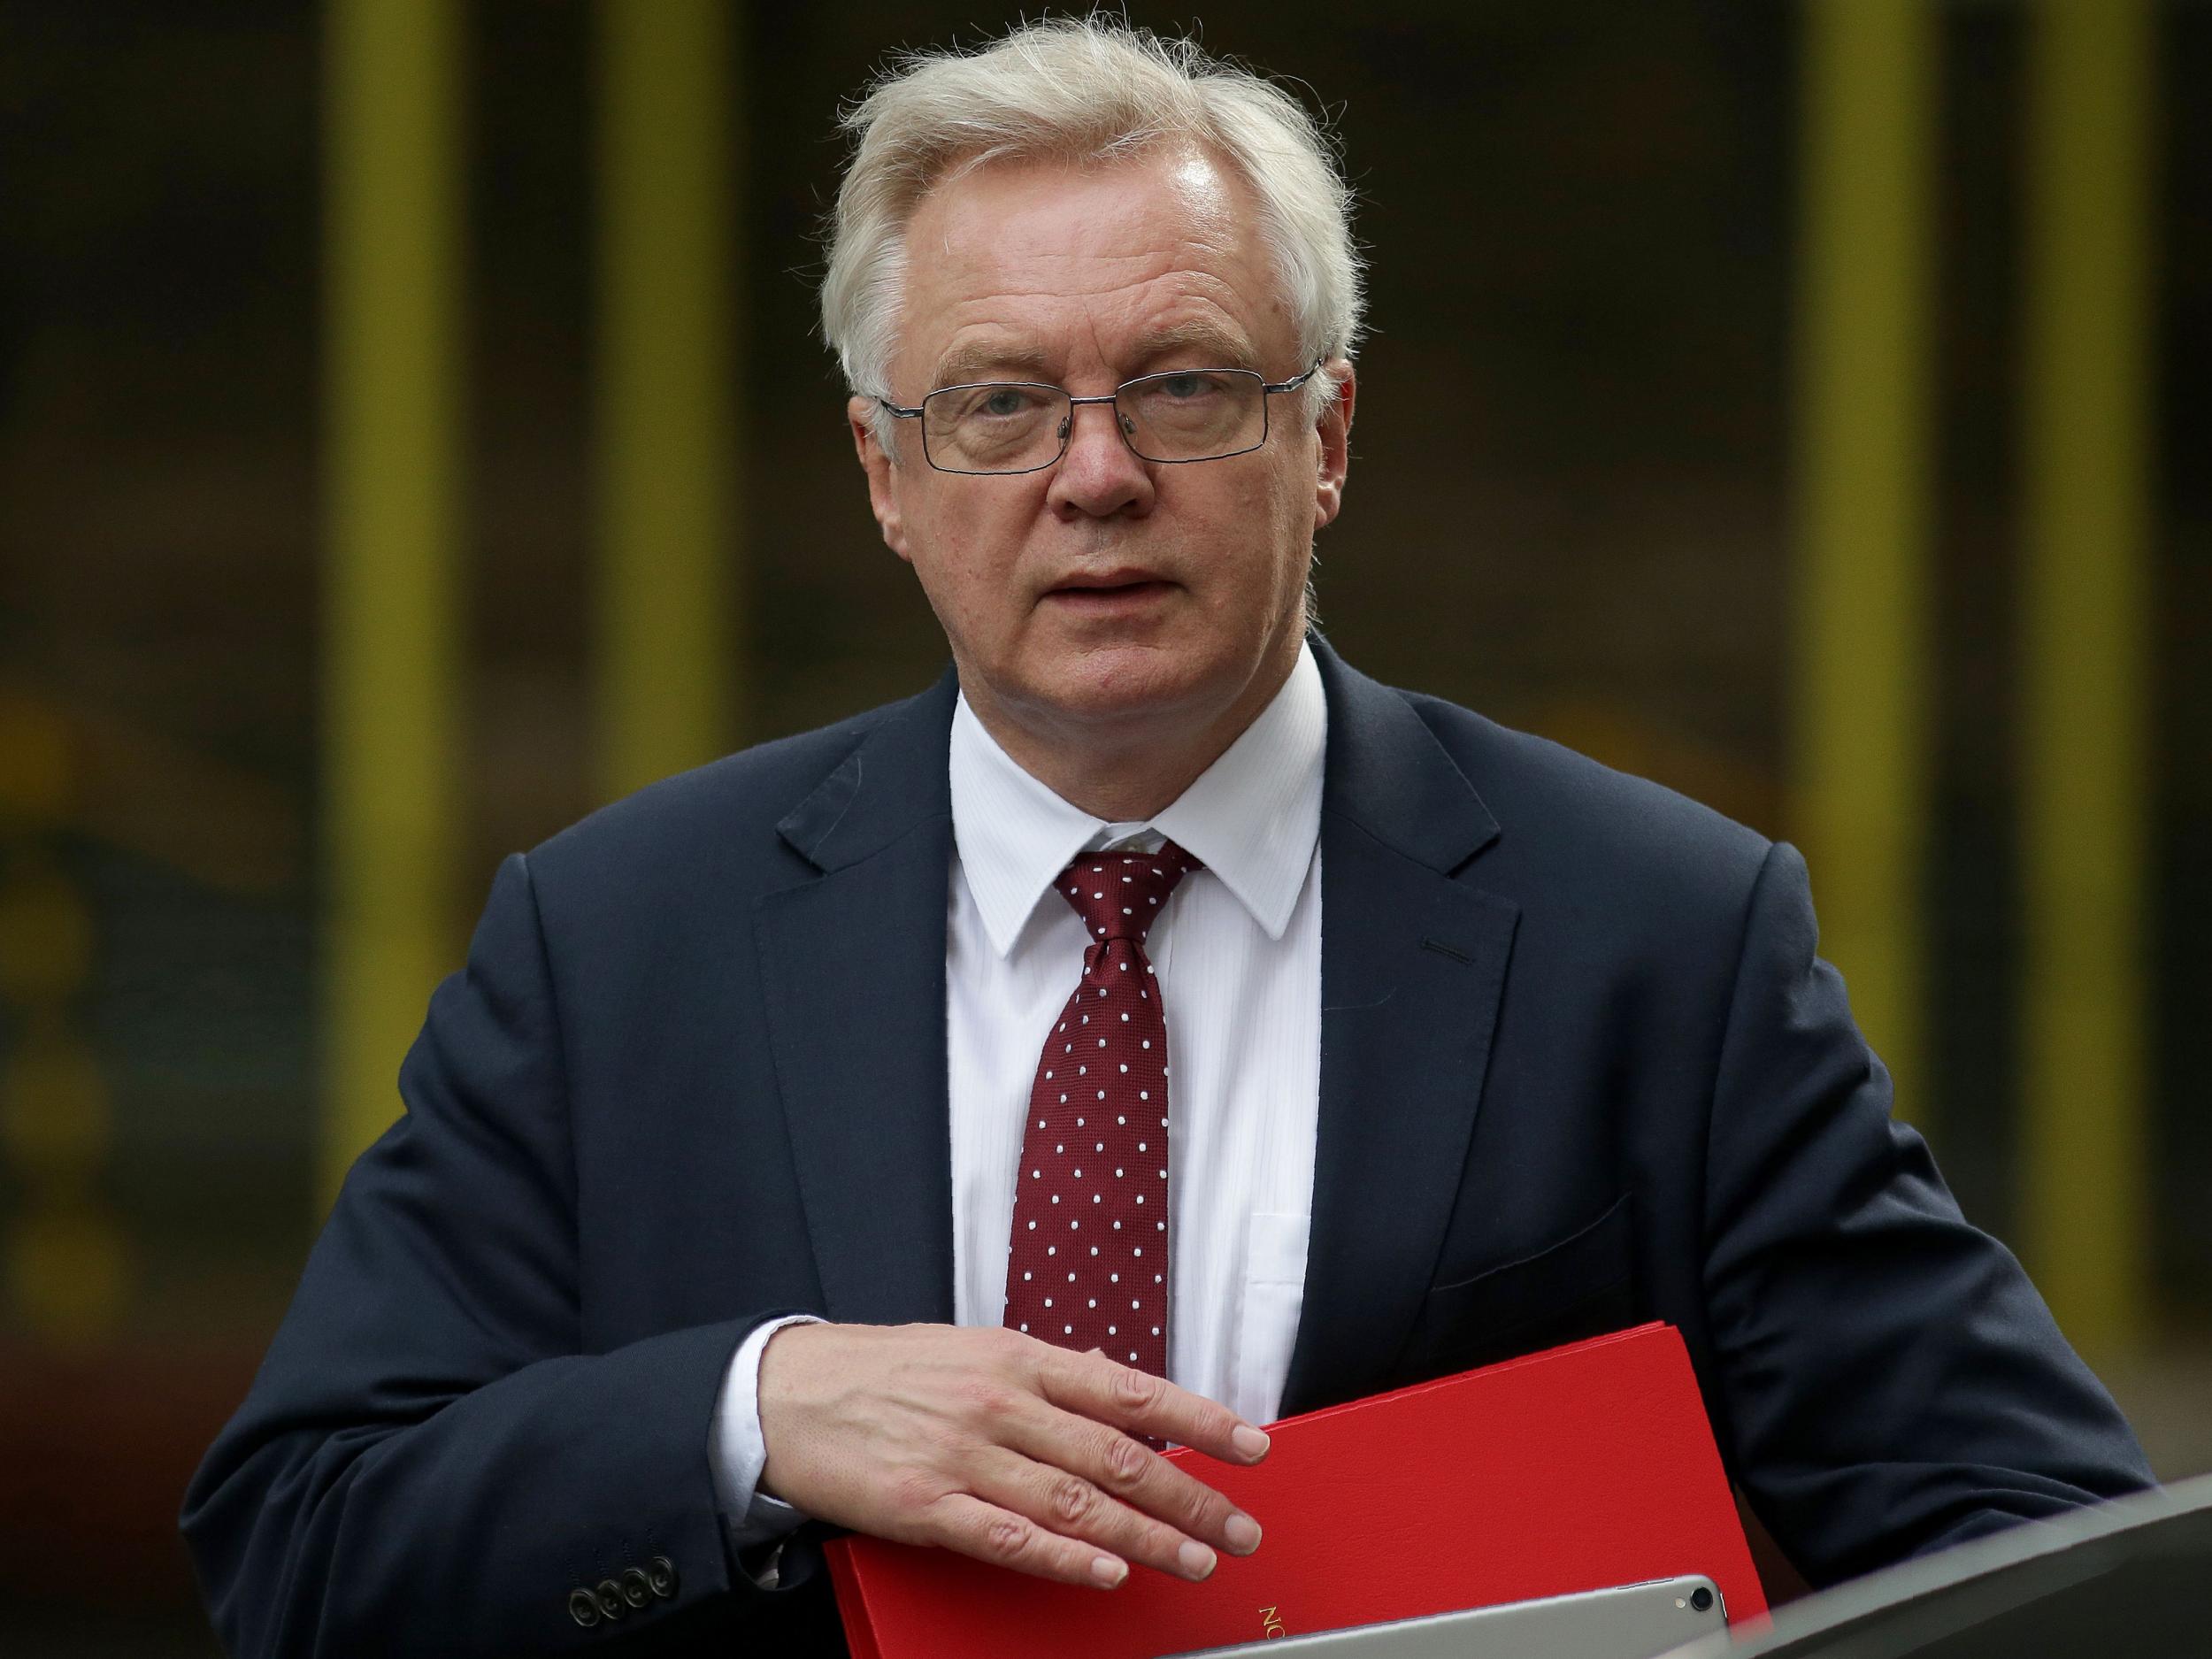 Brexit today - live updates: David Davis vows UK will not be plunged into &apos;Mad Max-style&apos; world after EU exit